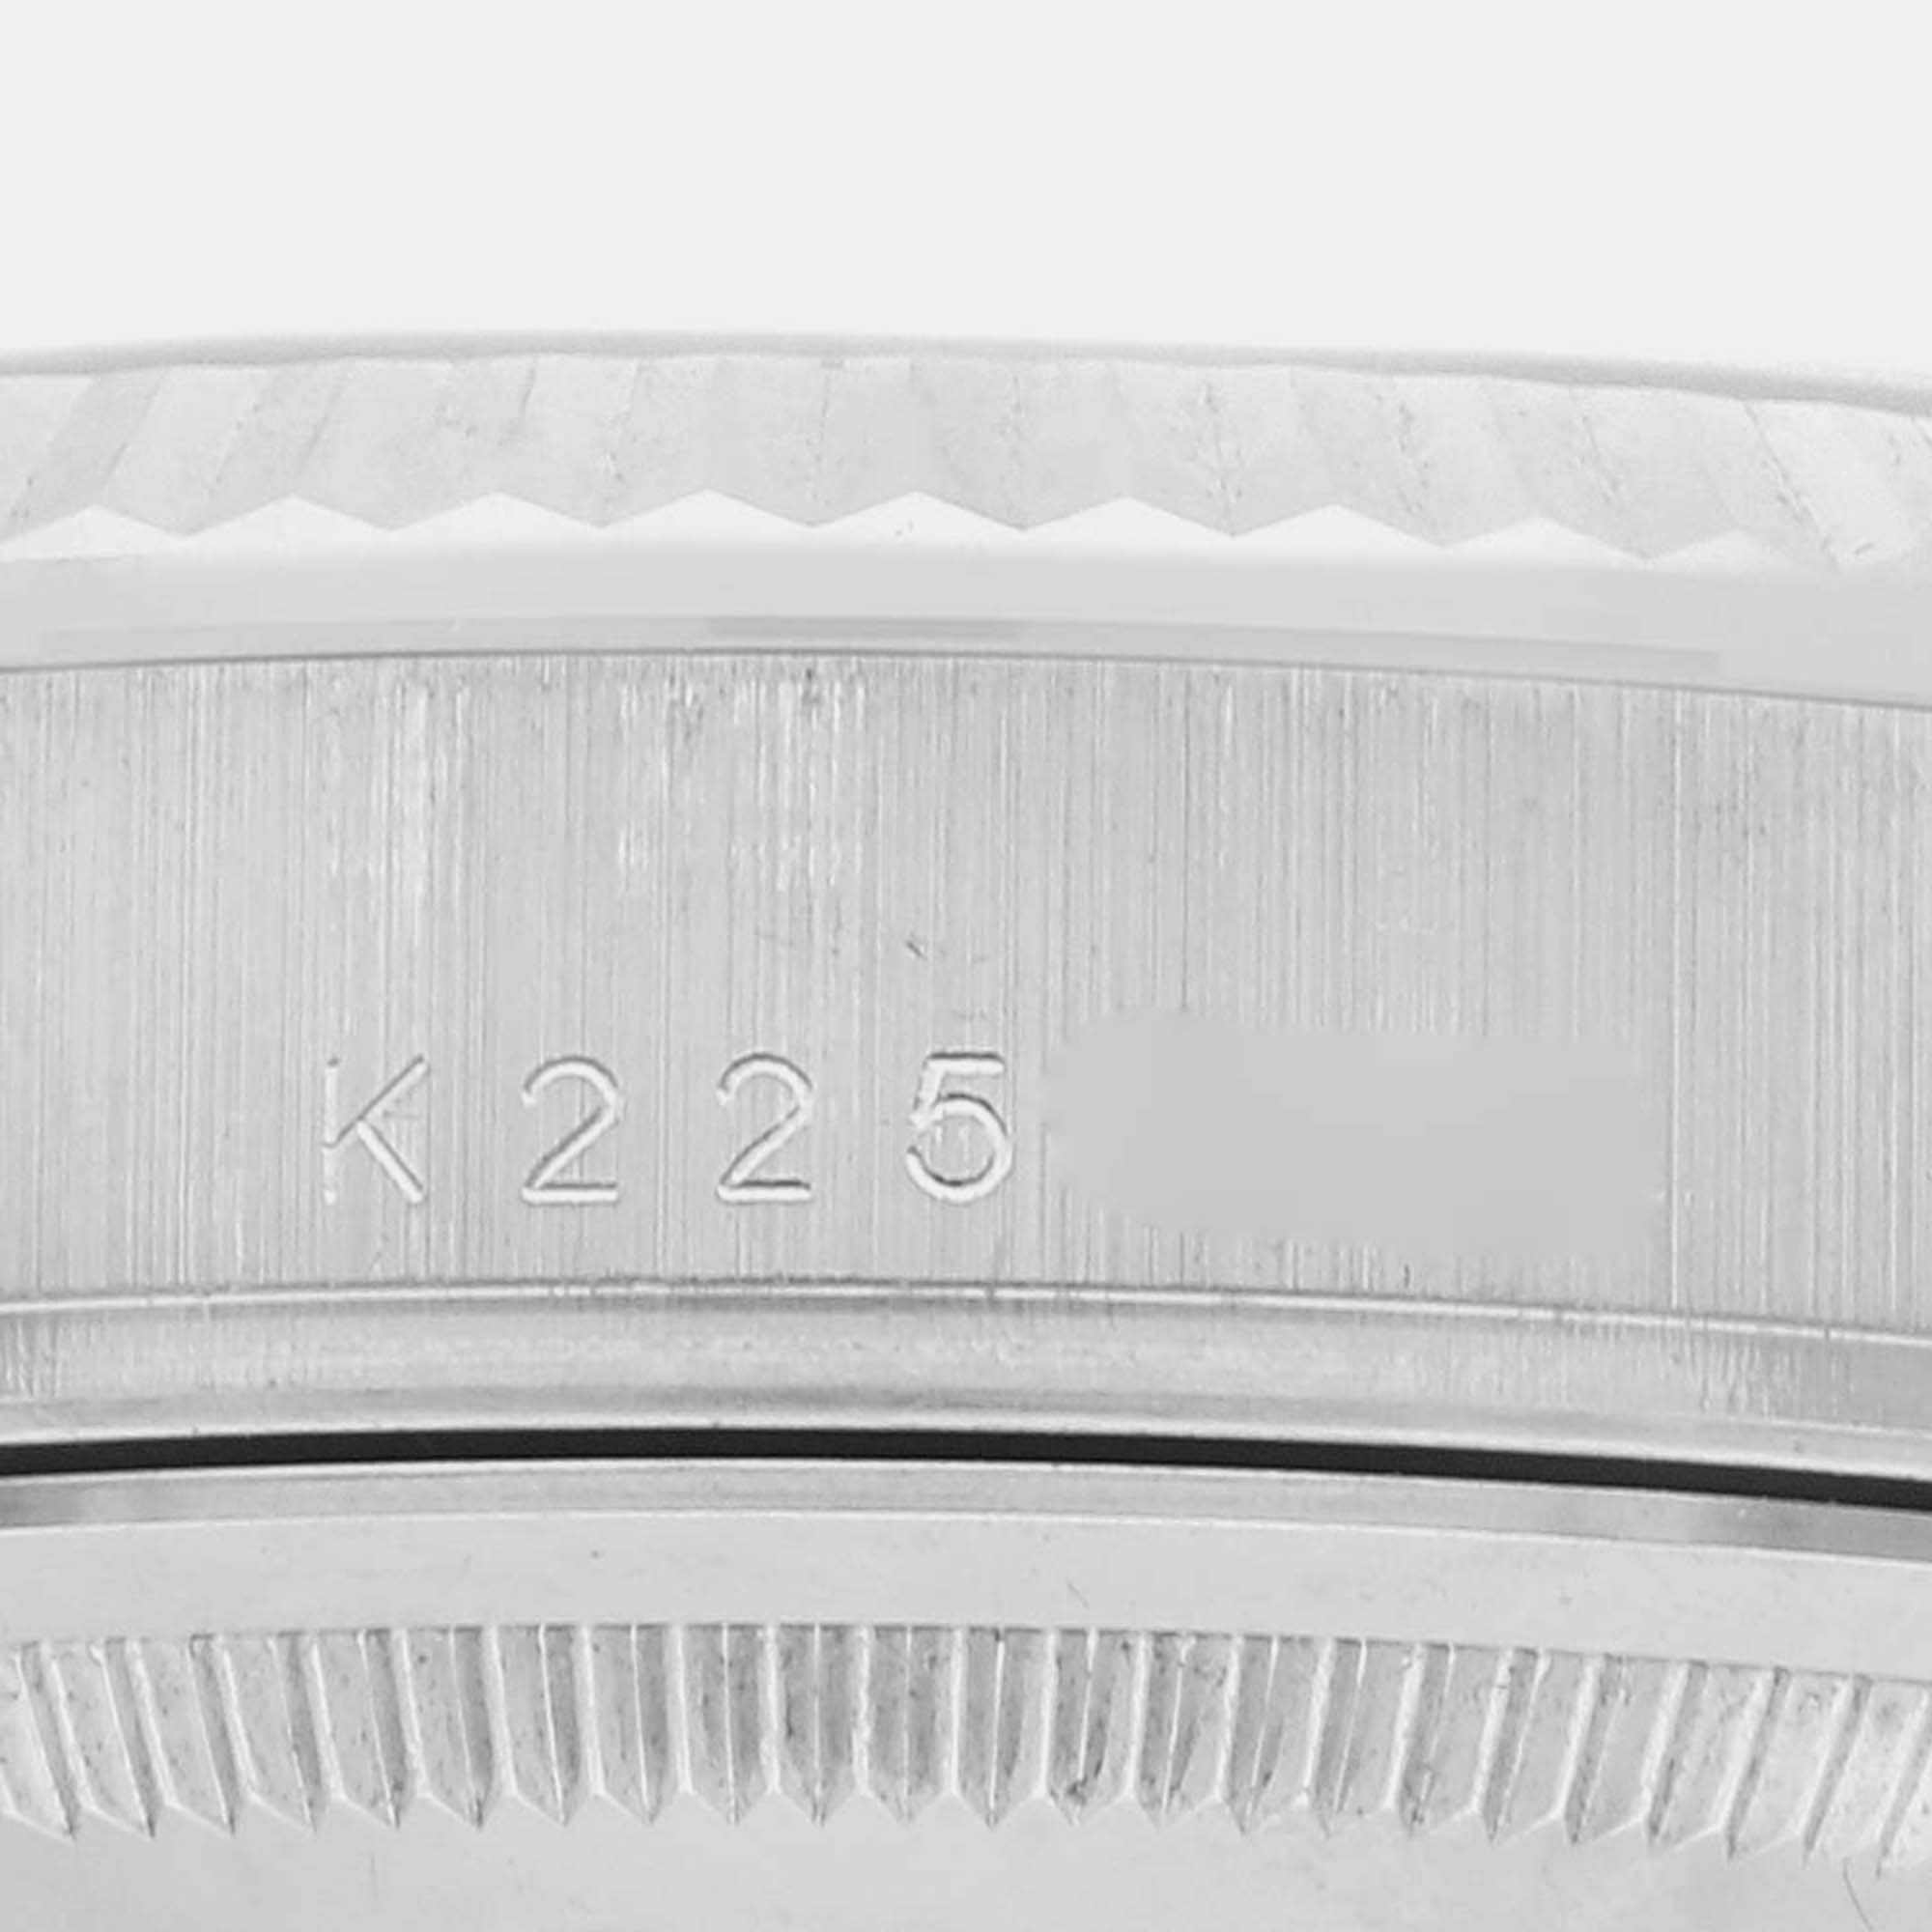 Rolex Day Date 36mm President White Gold Silver Dial Watch 118239